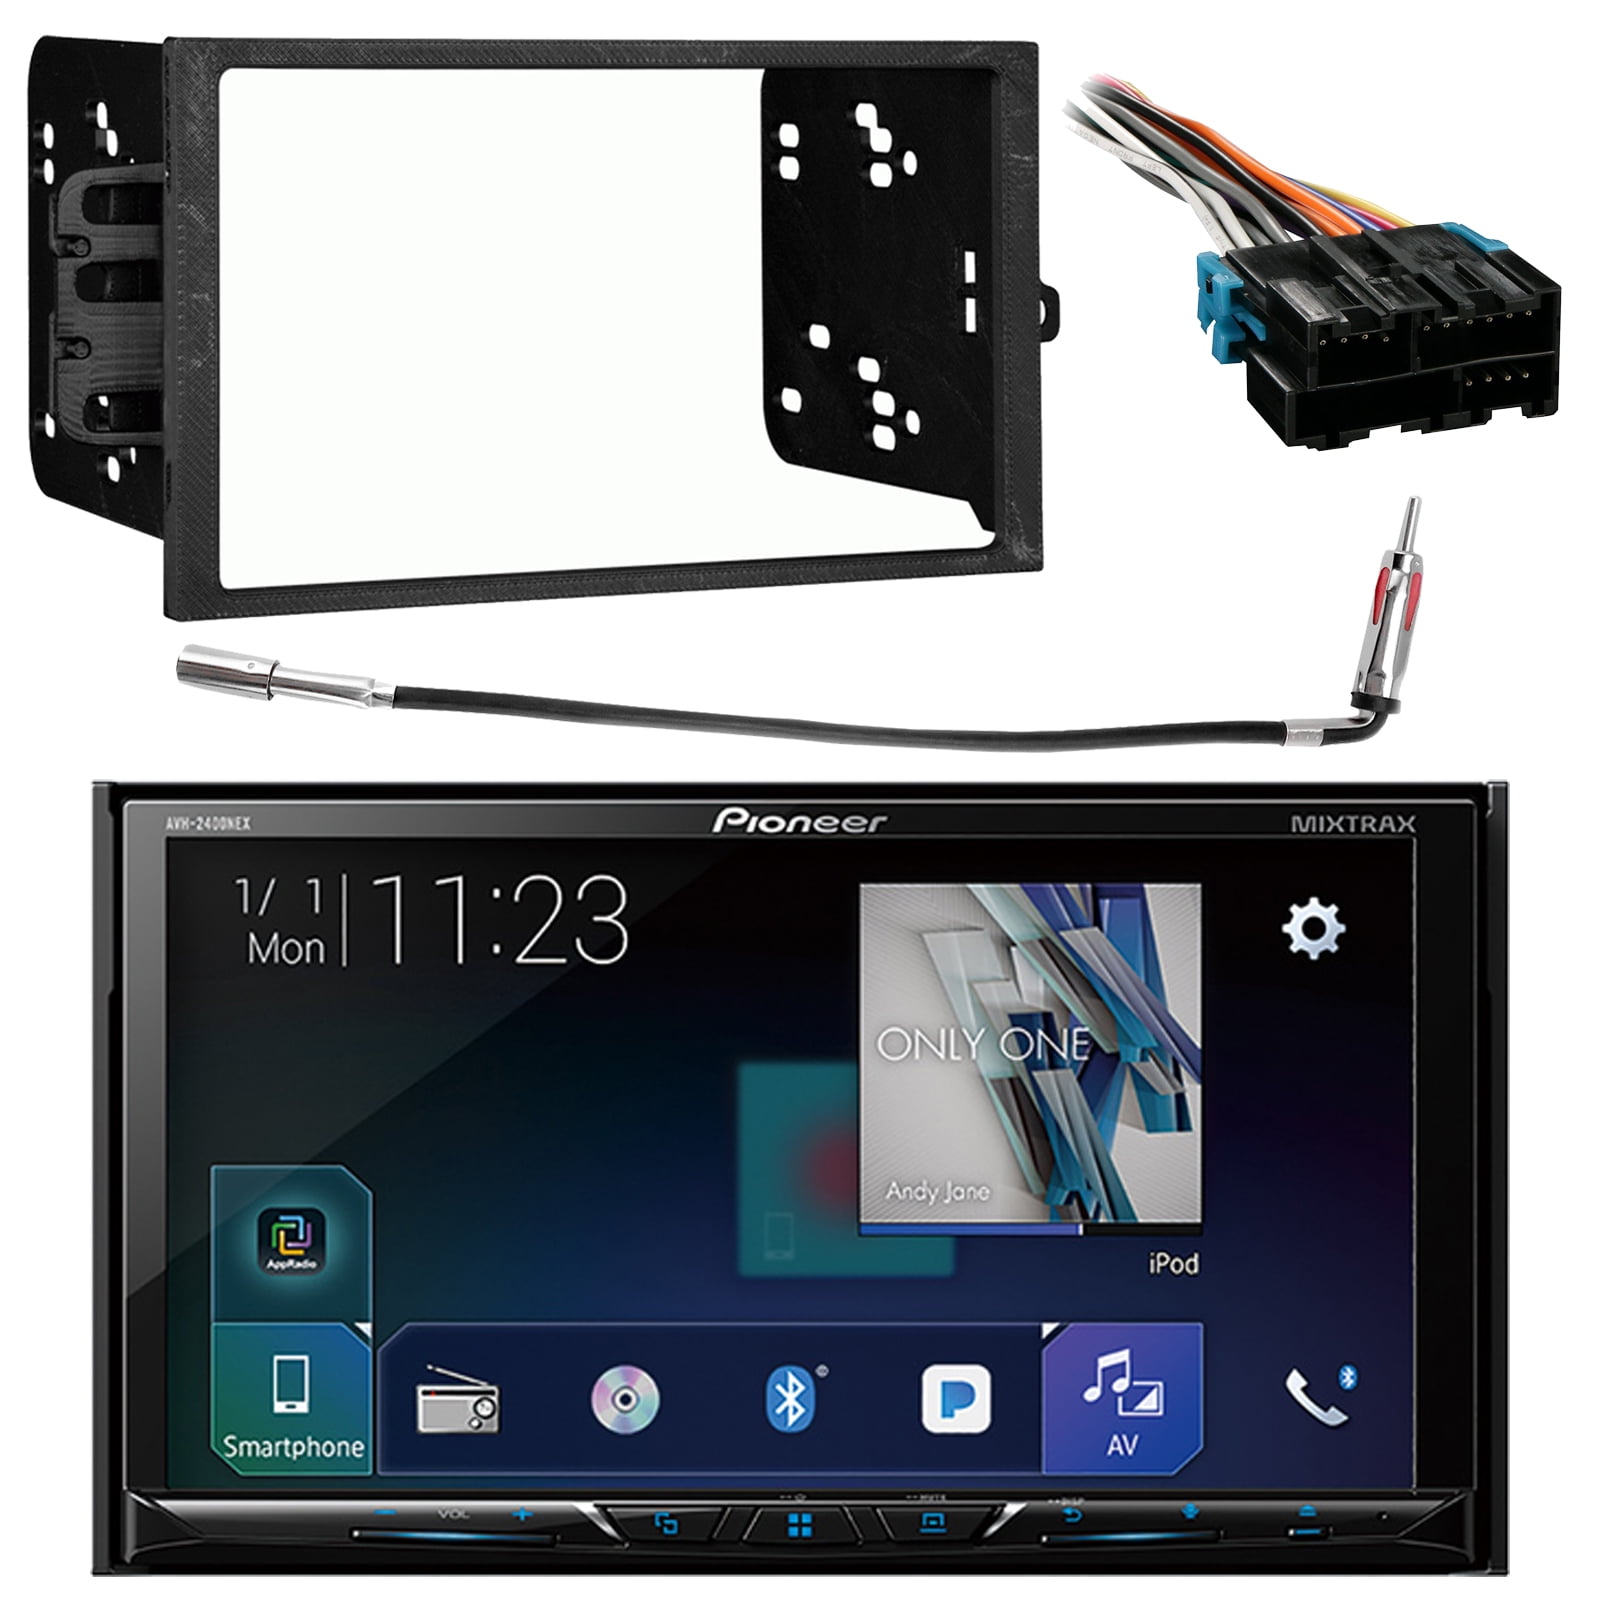 Pioneer 7 Inch Double Din With Apple Carplay & Android Auto (AVH-2400NEX)